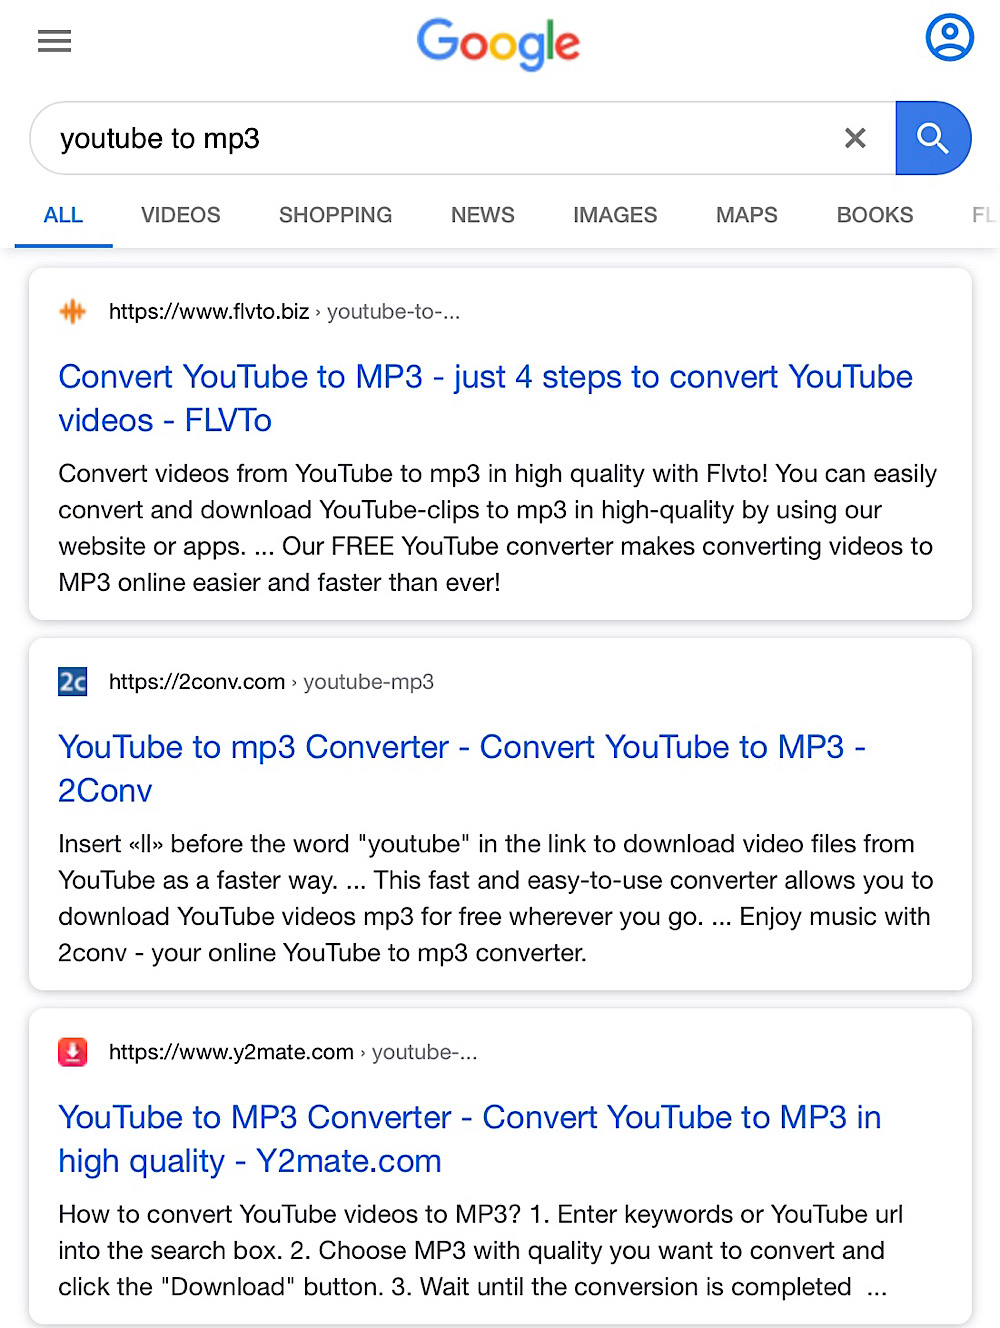 flvto.biz, 2conv.com, and y2mate.com are still topping the Google Search results for “youtube to mp3”